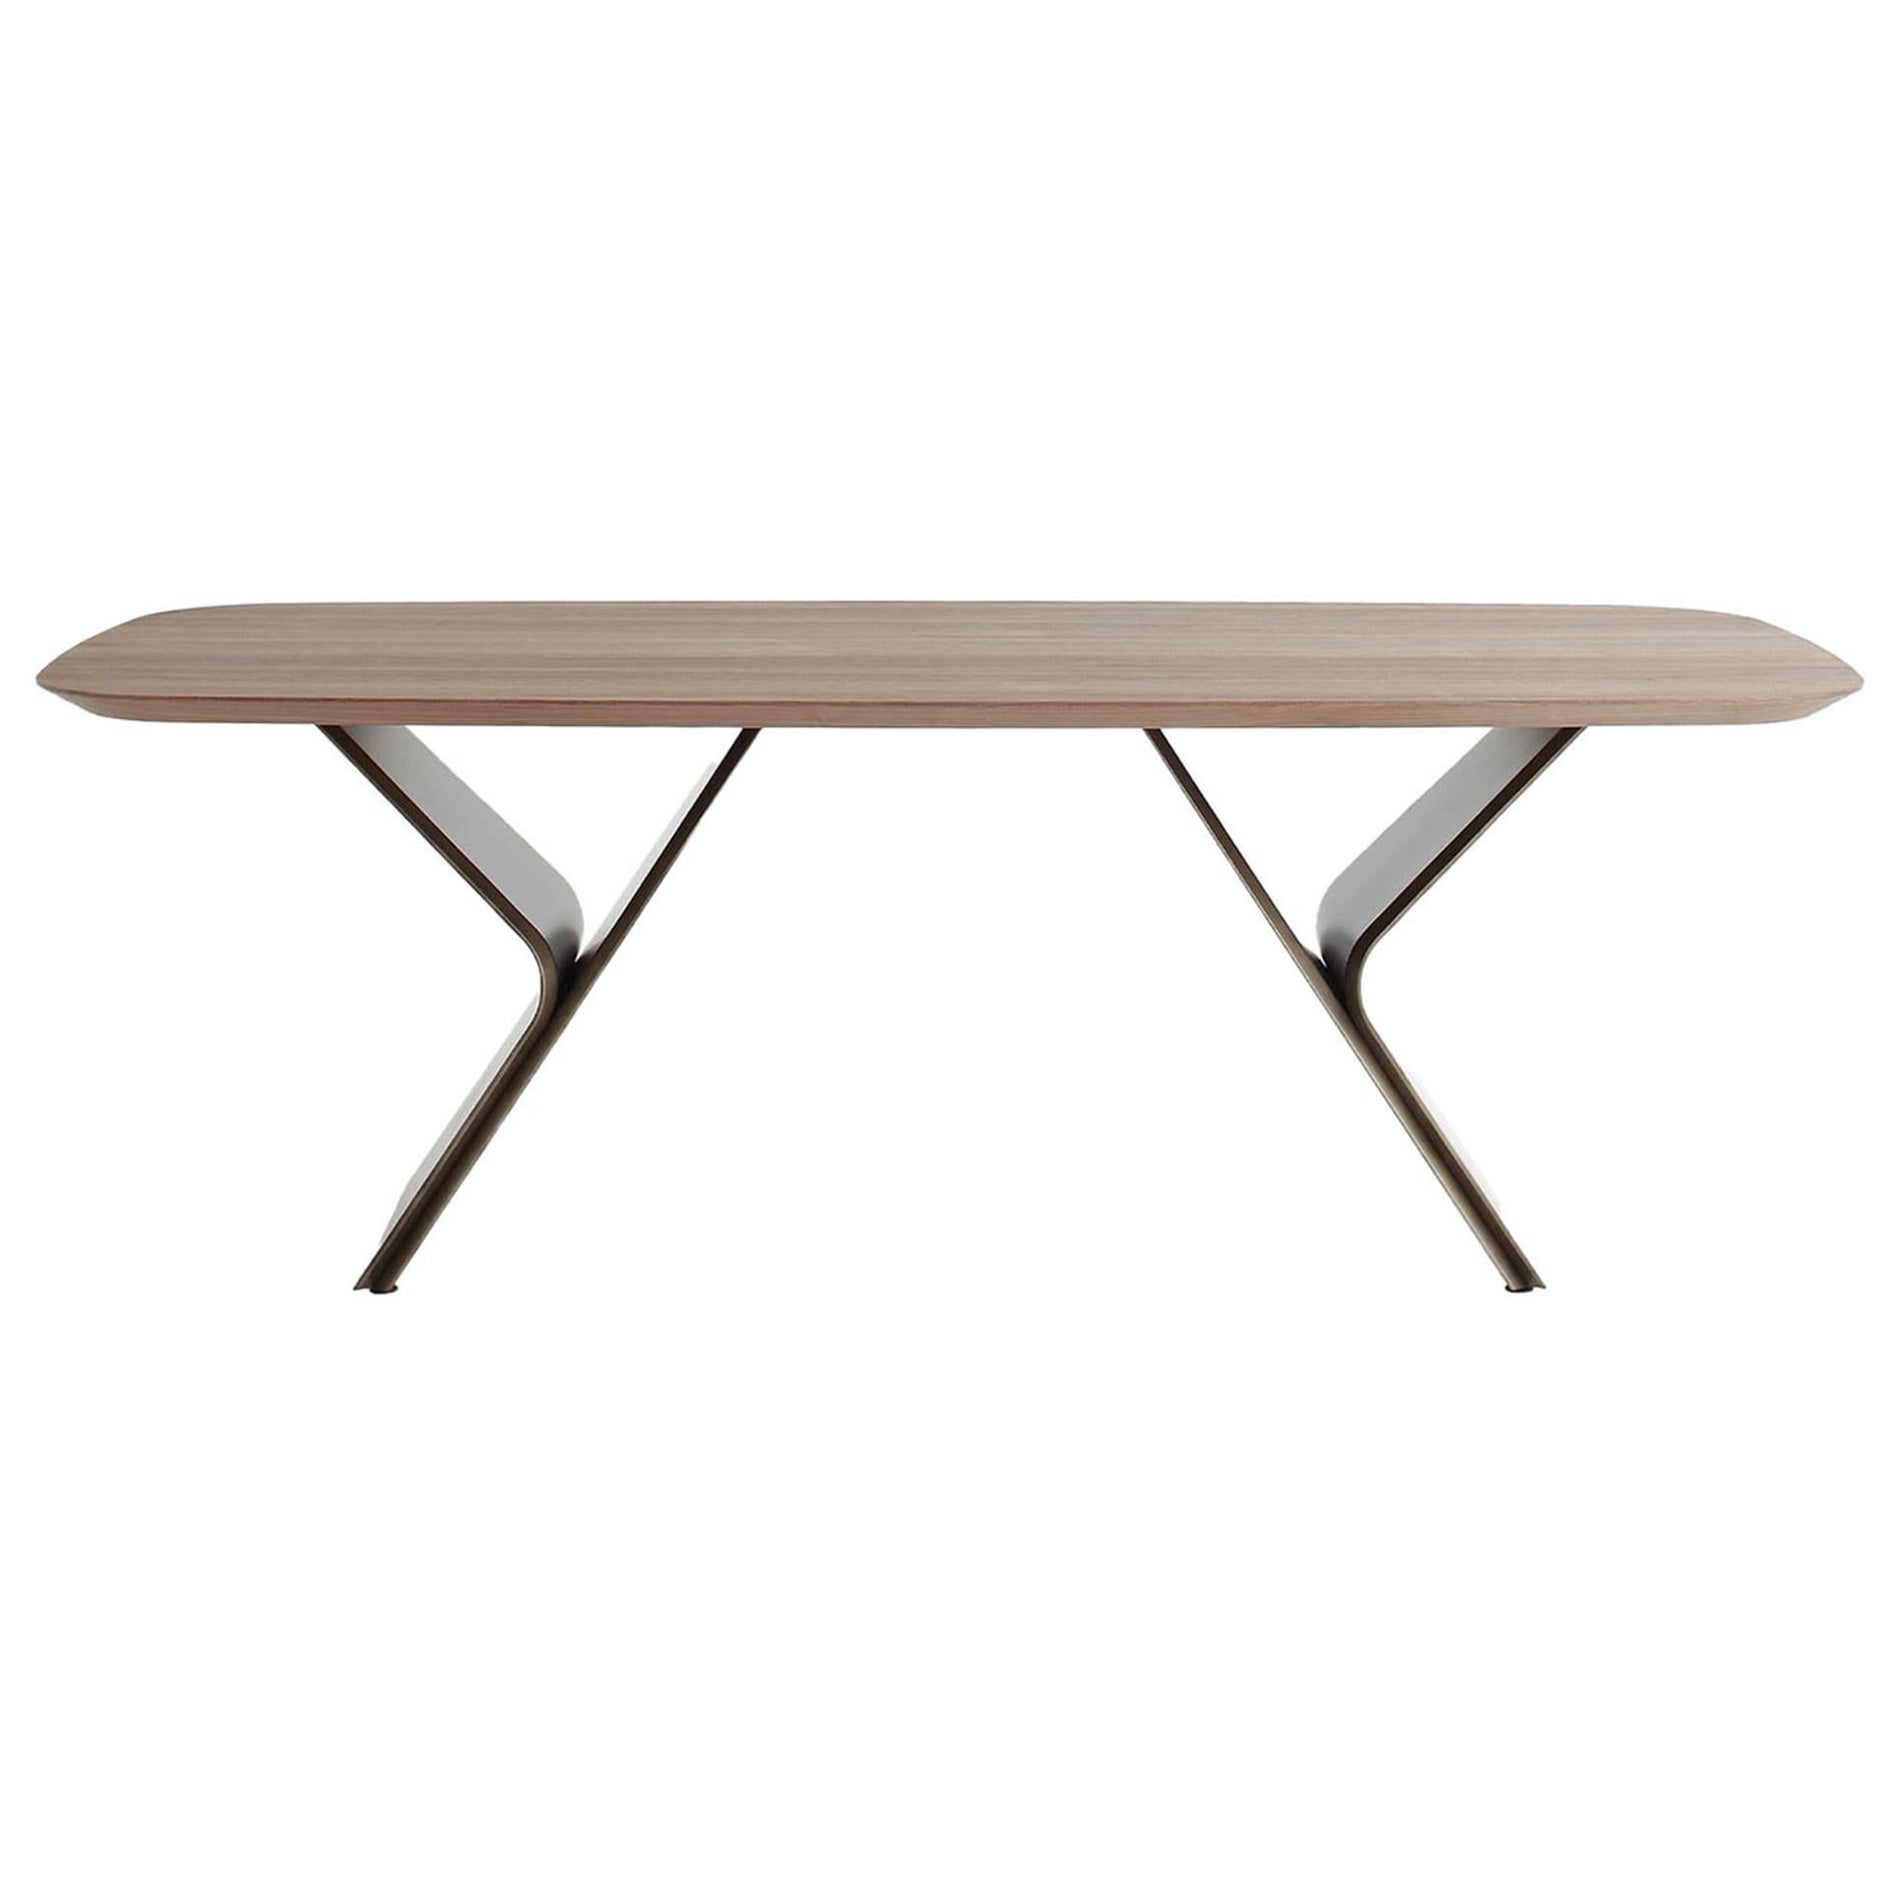 Metaverso Canaletto Walnut-Veneered Table For Sale